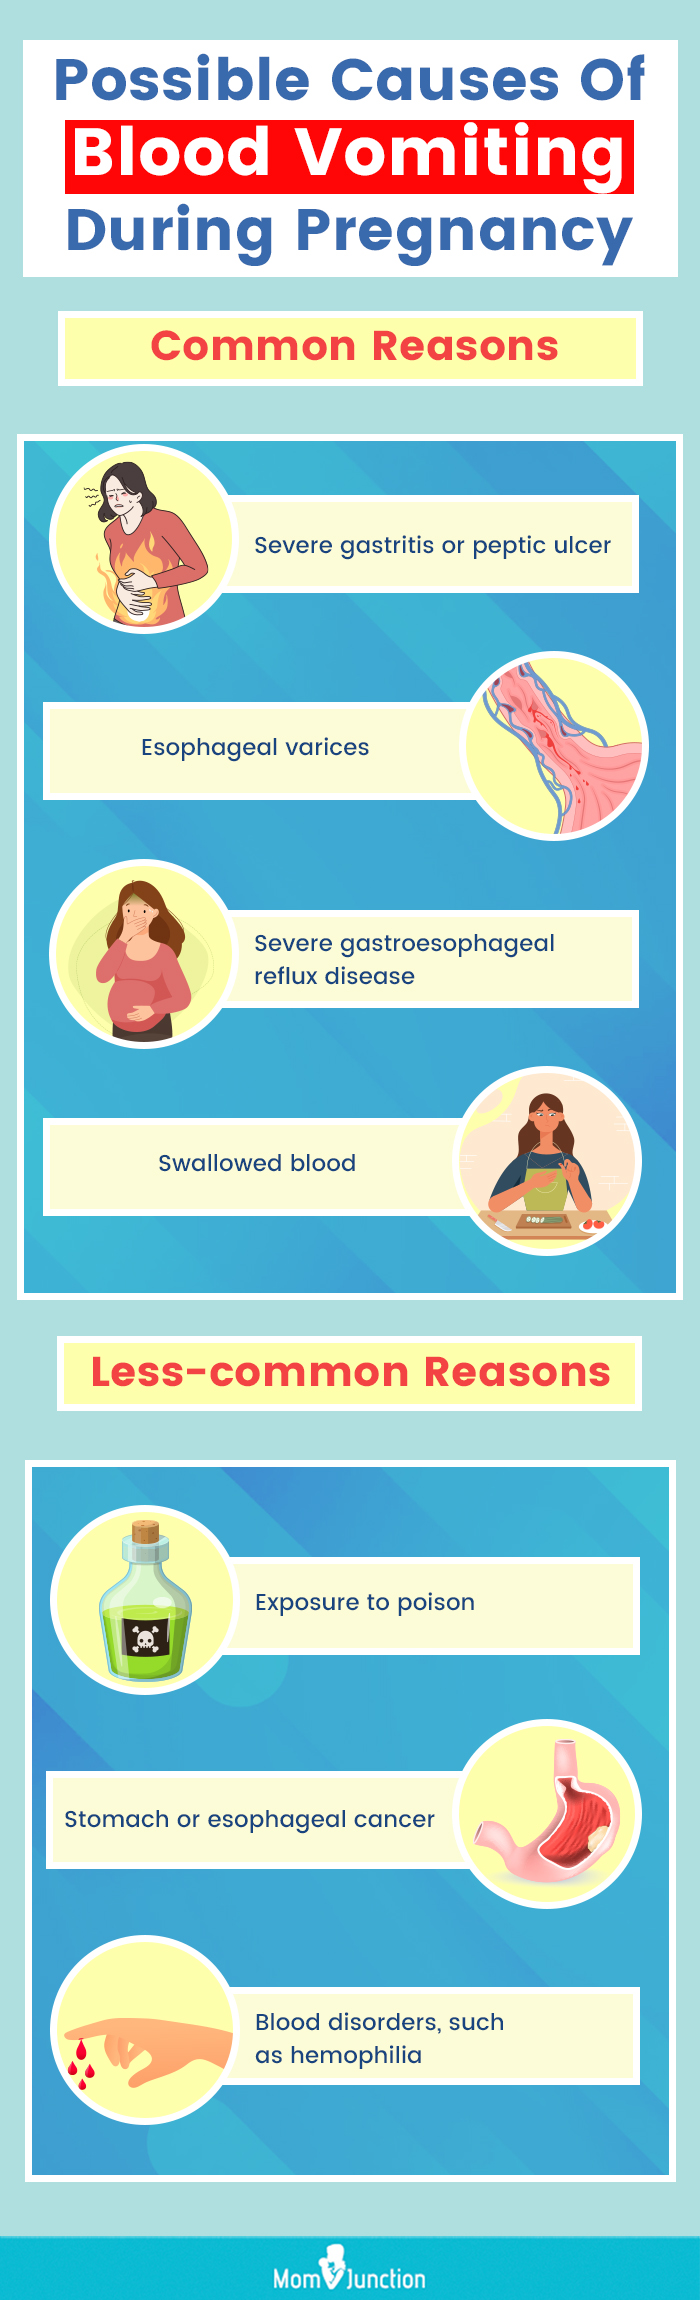 possible causes of blood vomiting during pregnancy [infographic]